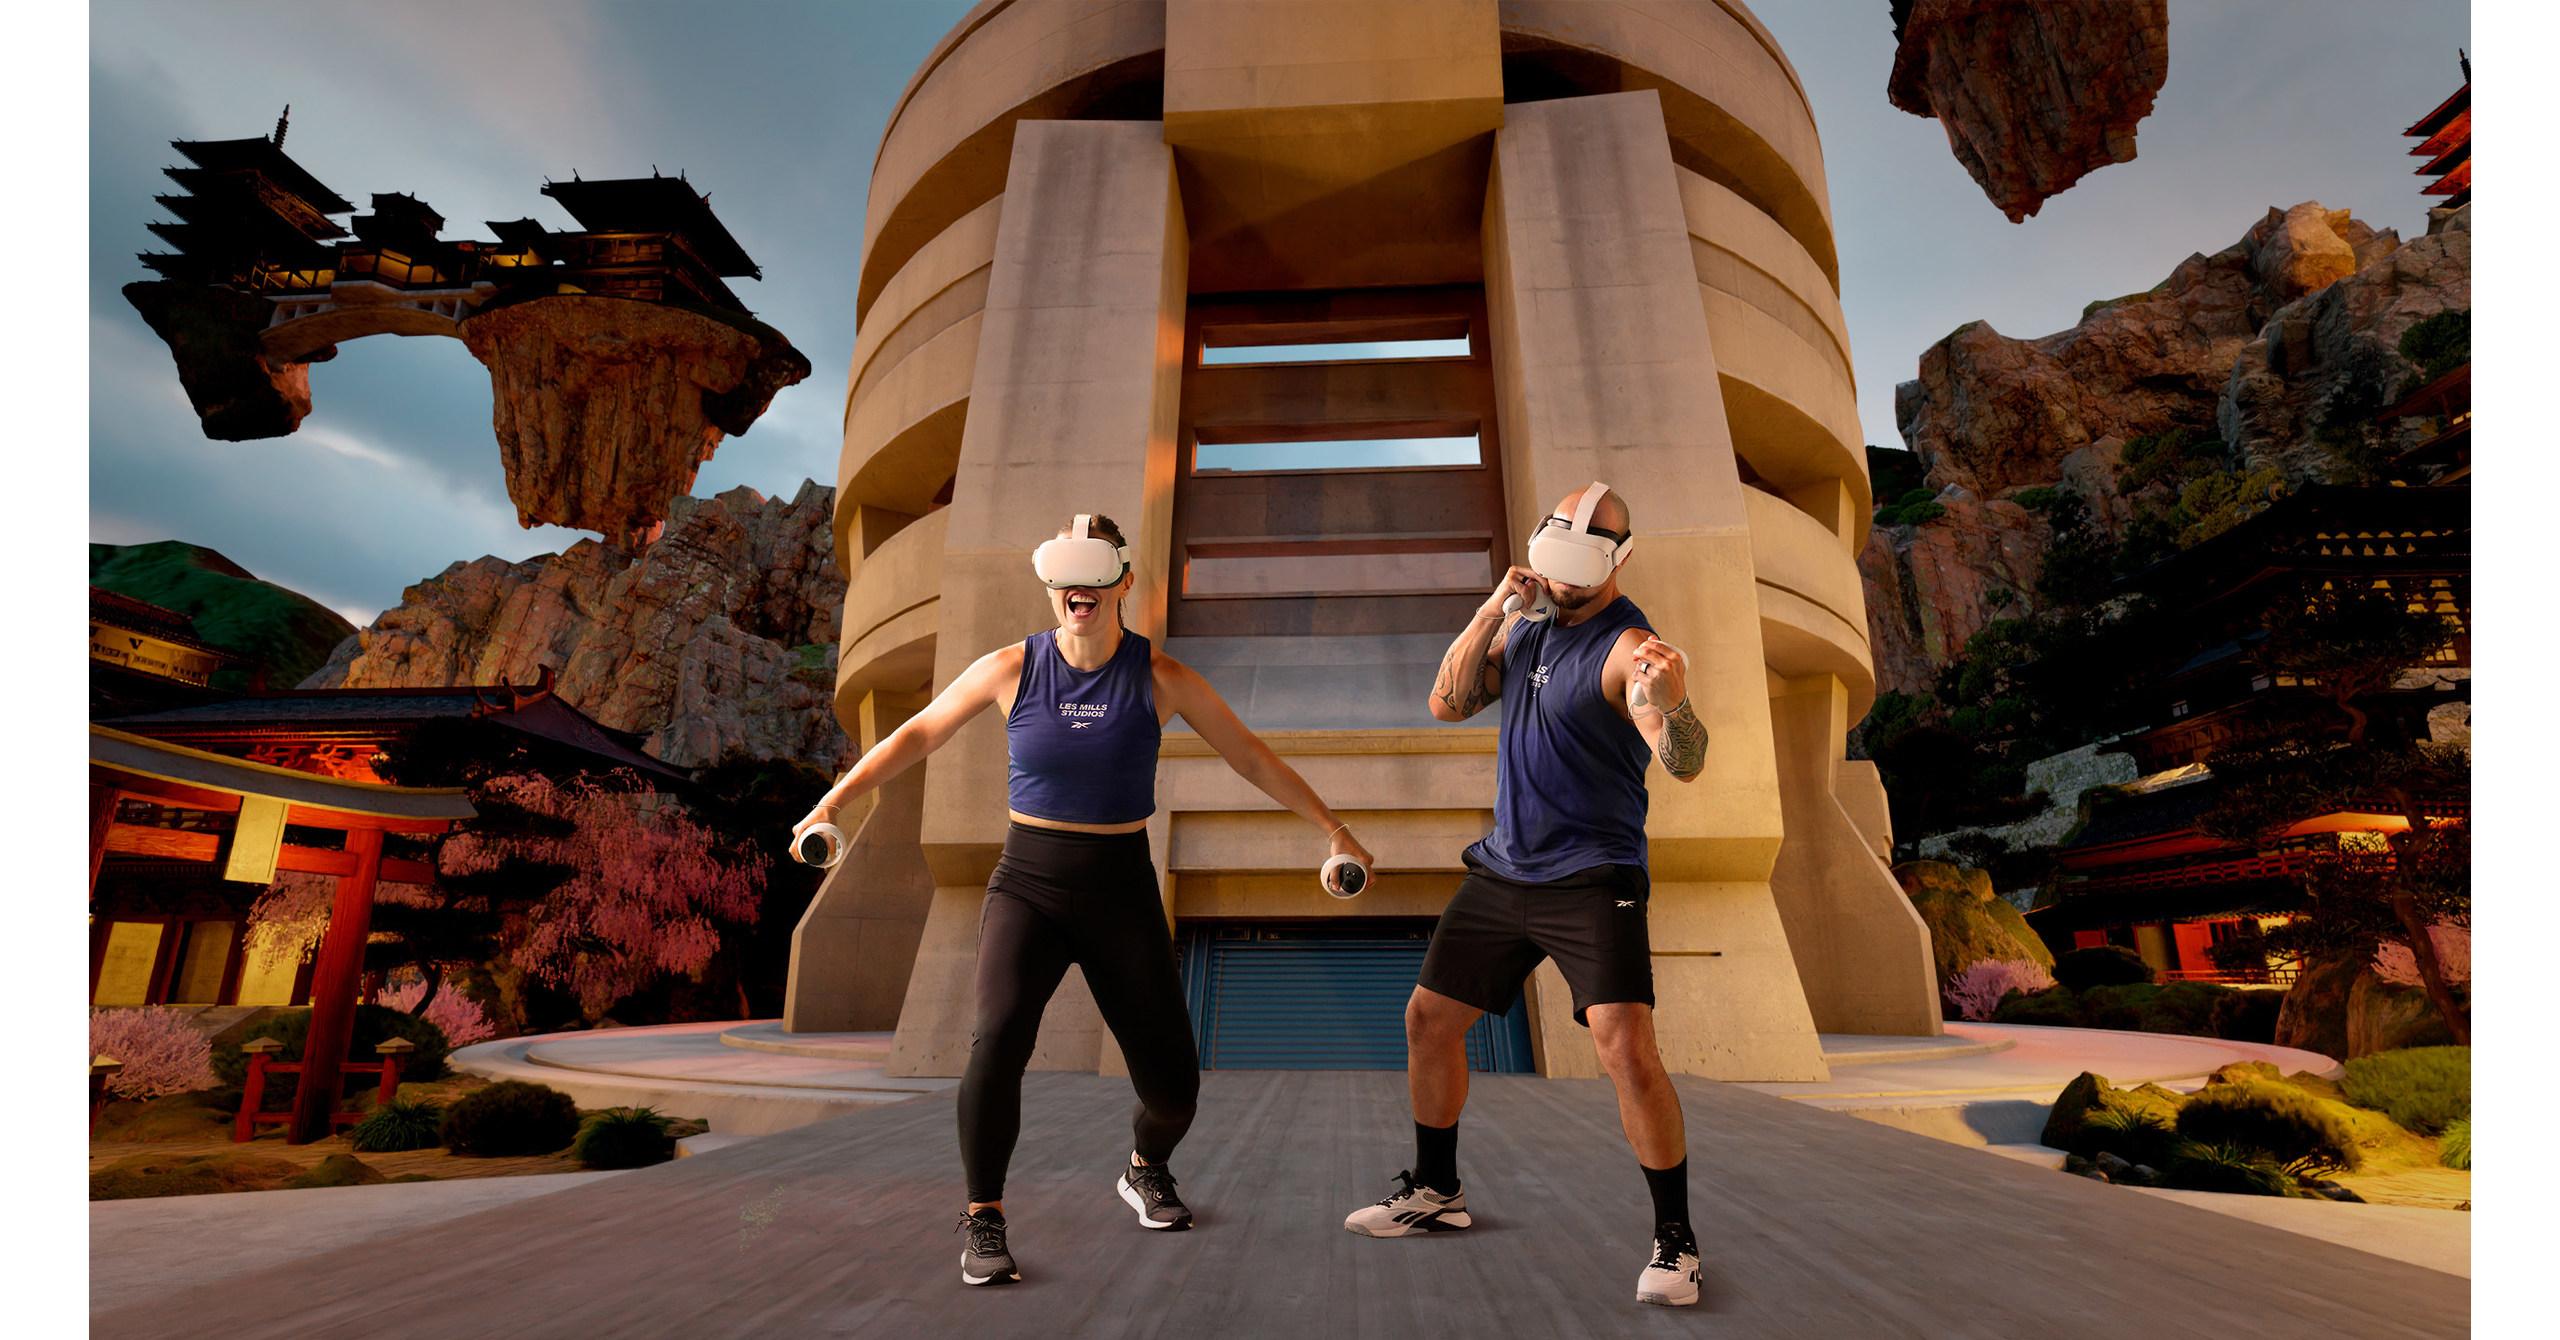 Les Mills takes martial arts into the metaverse with BODYCOMBAT VR app